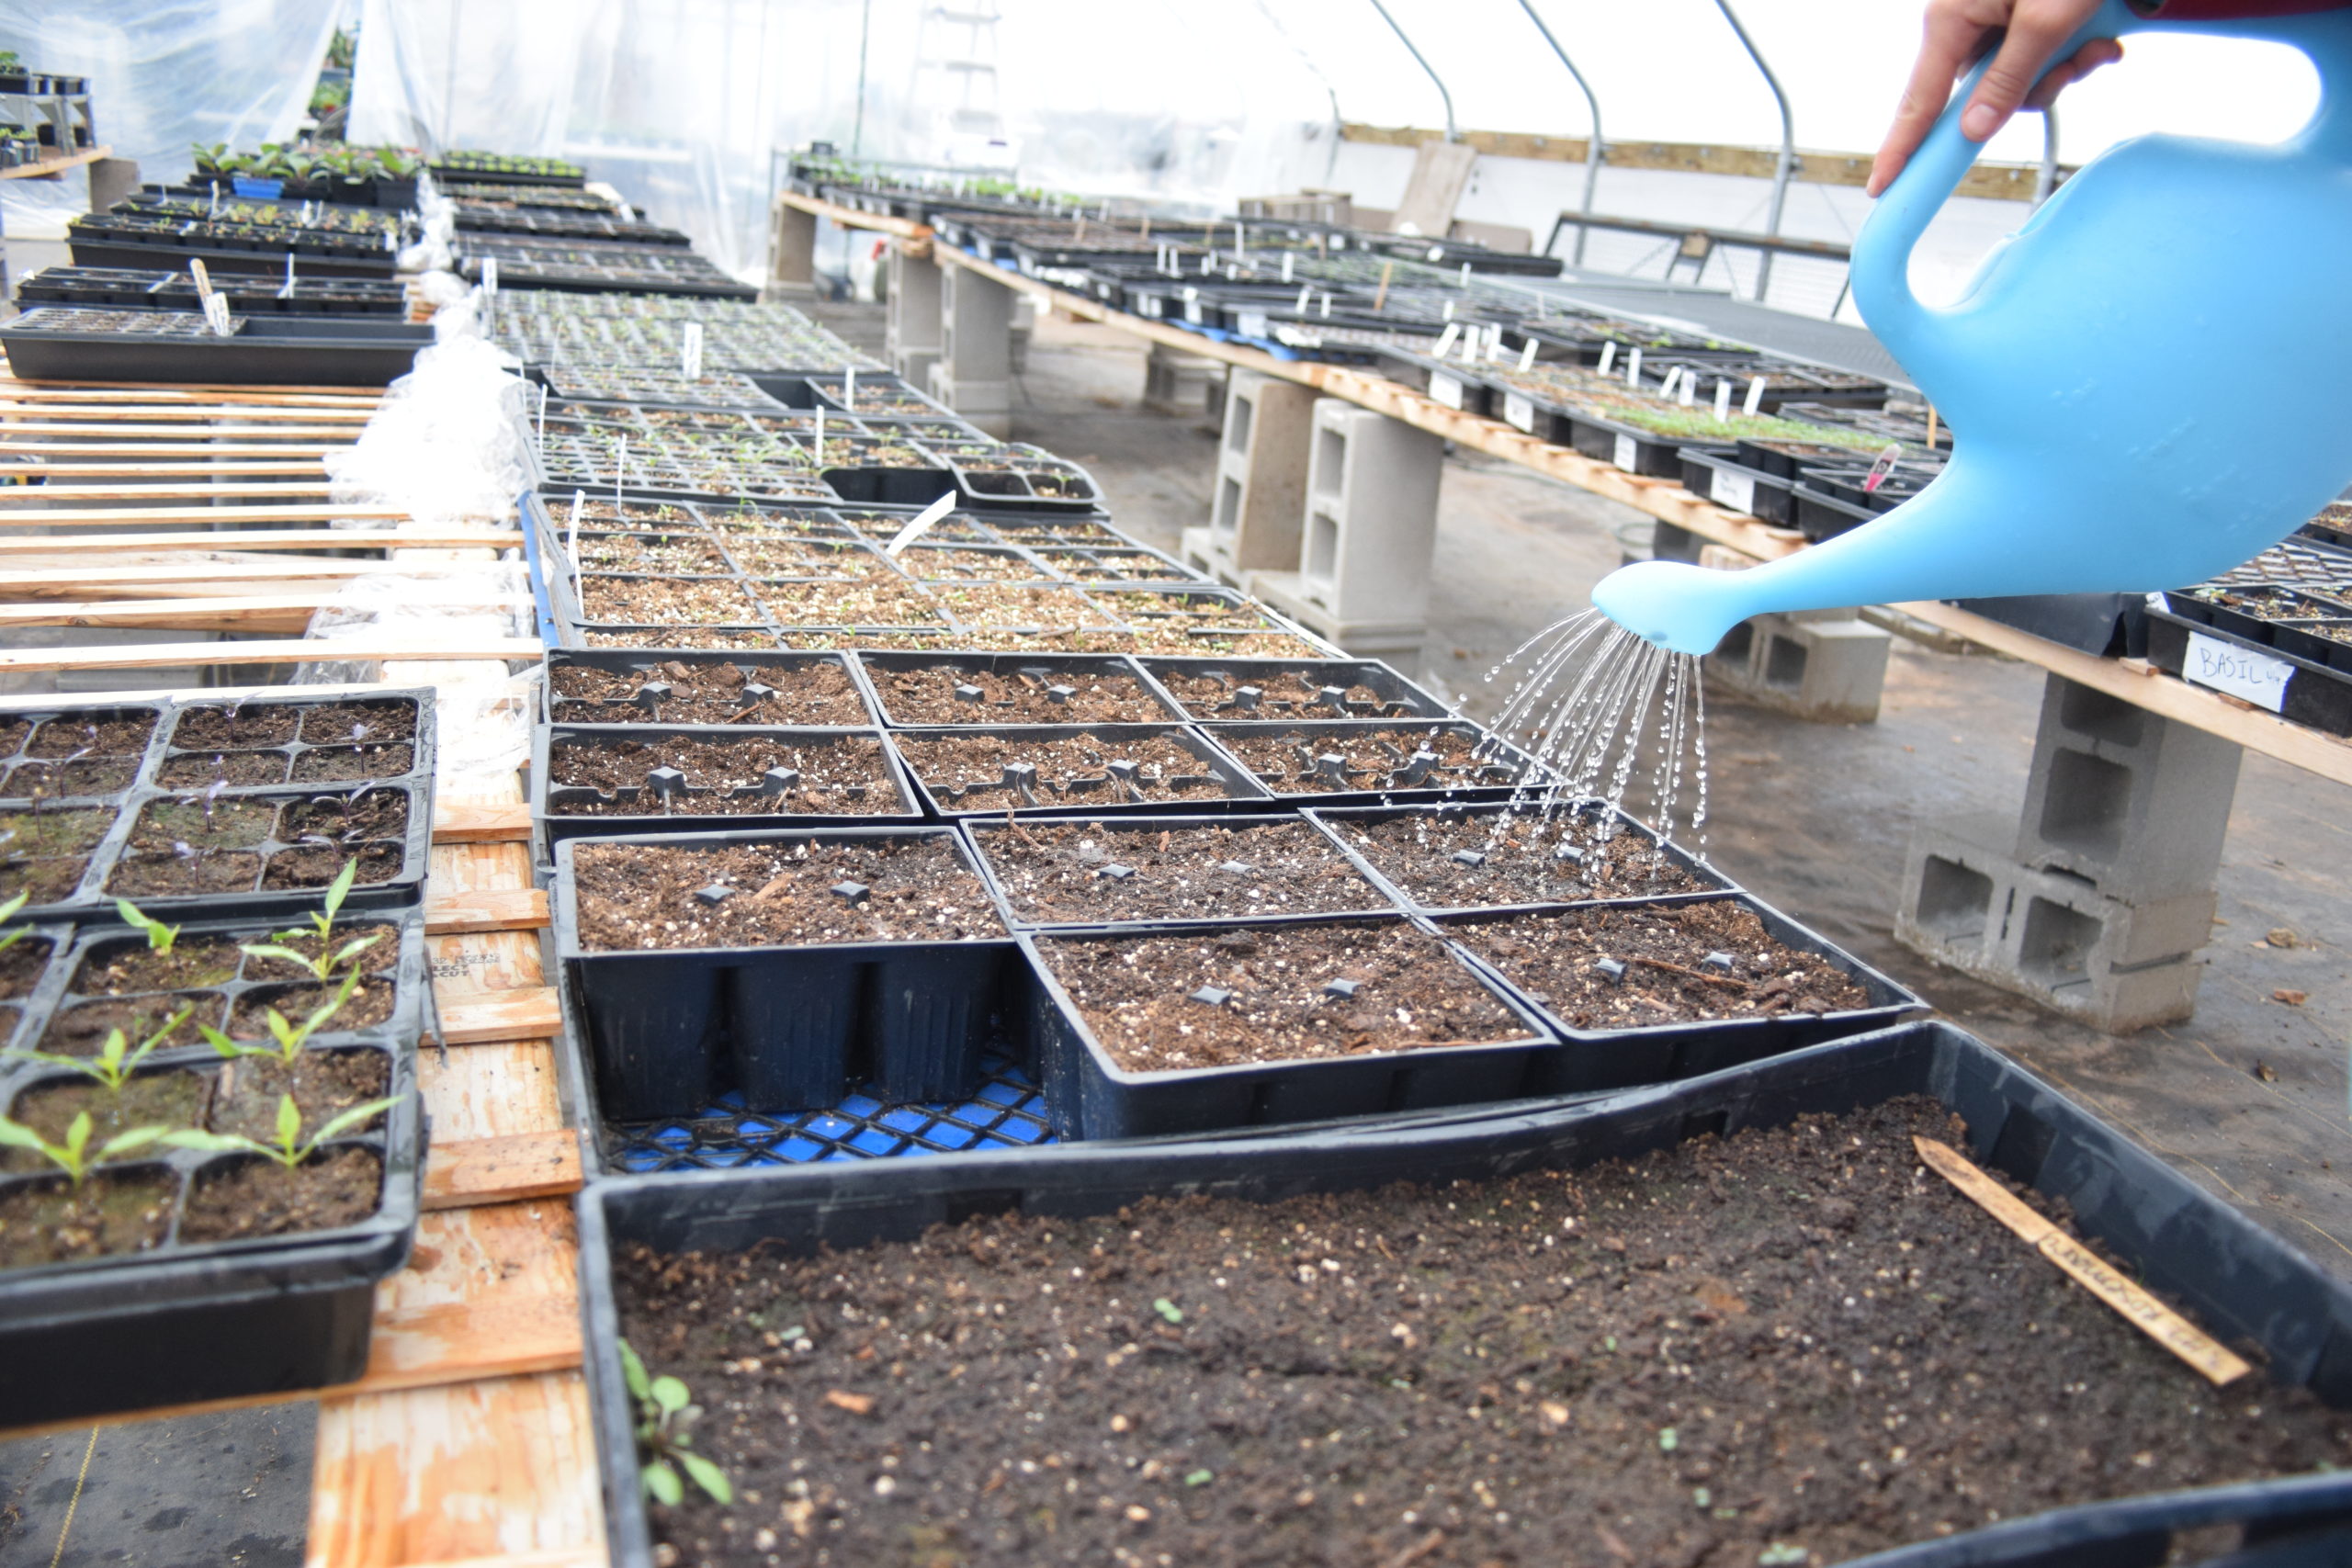 Blue watering can waters a tray of seedlings, on a table full of seedling trays.